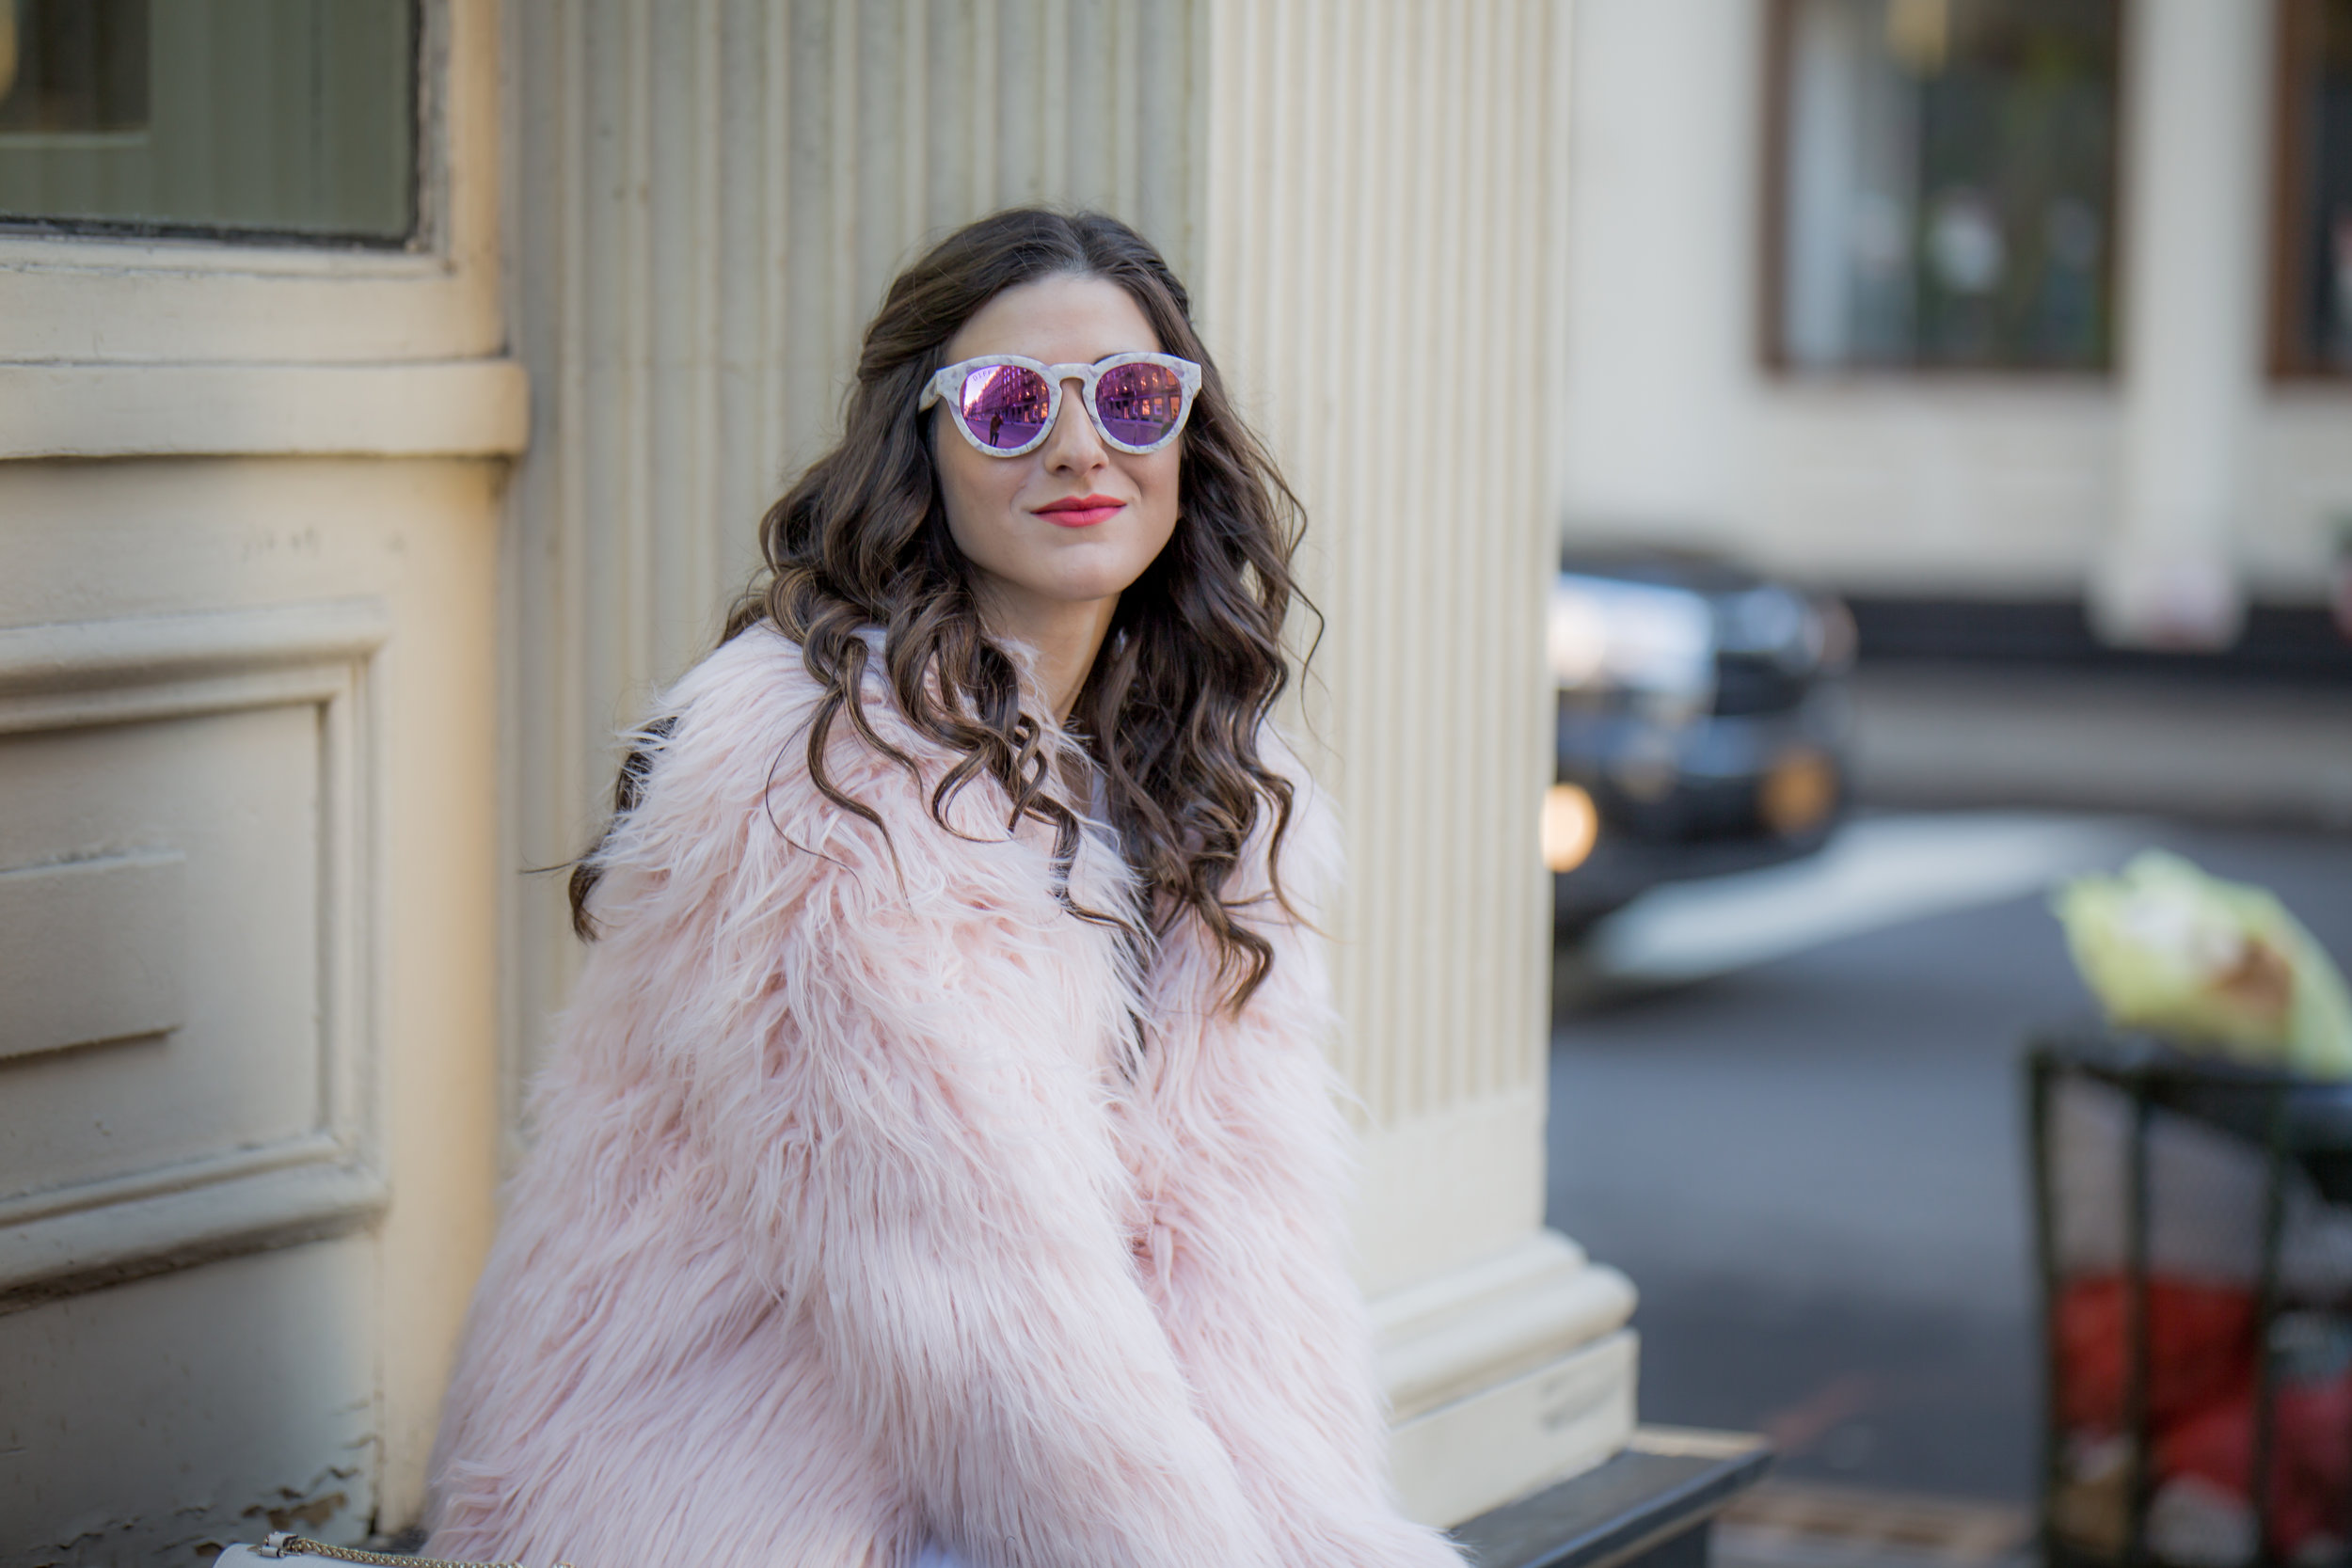 Pink Faux Fur Jacket White Jeans The Best Career Advice Esther Santer Fashion Blog NYC Street Style Blogger Outfit OOTD Trendy Winter Whites Henri Bendel Bag Tan Booties Girl Women Shop Sale Hair What To Wear Wearing Model Photoshoot Accessories Shoes.jpg